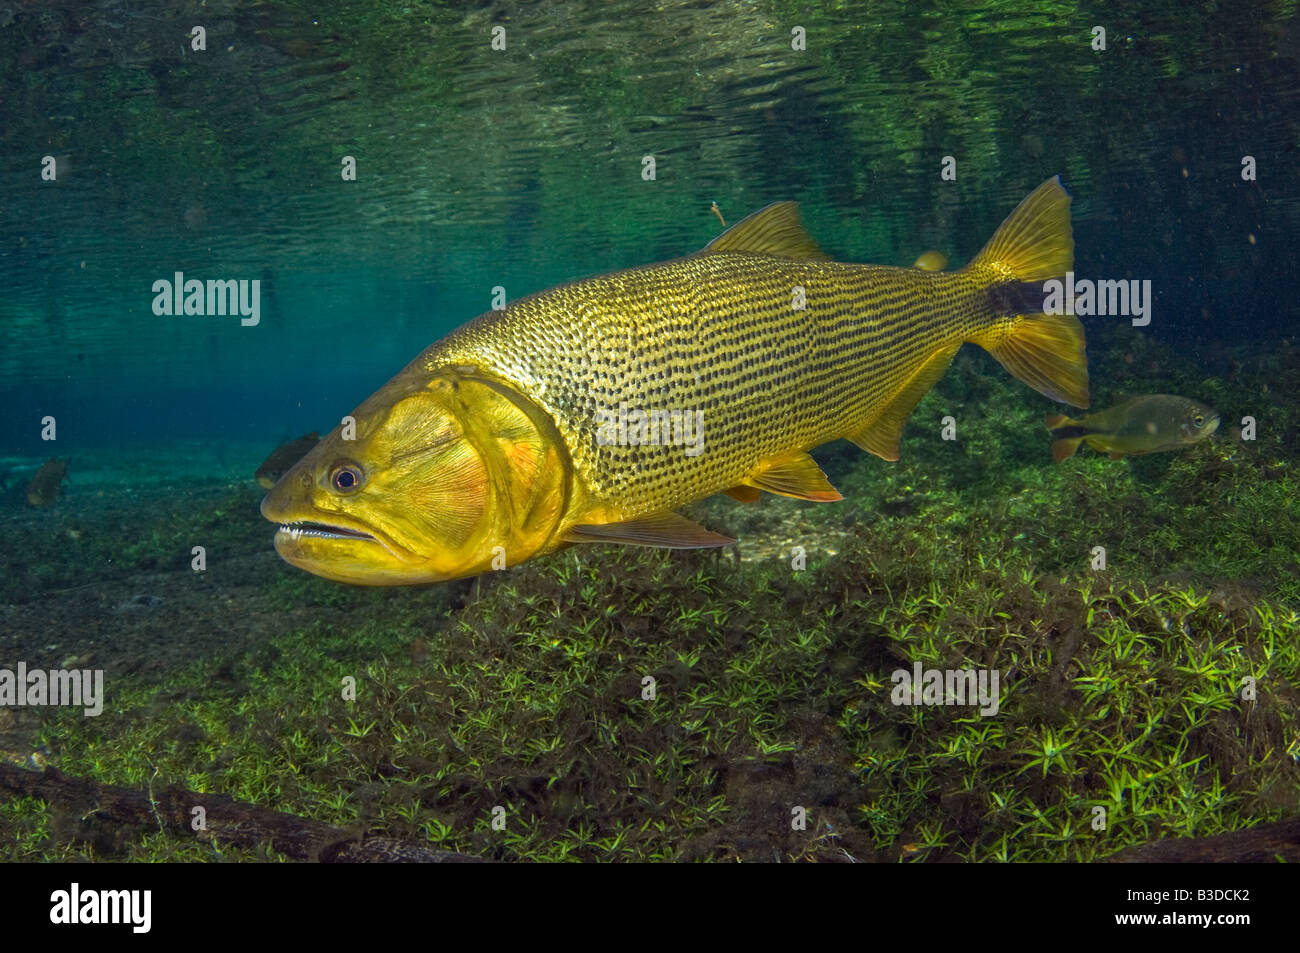 Dourado Salminus brasiliensis is a large predatory gamefish found in Central and Western Brazil in freshwater rivers. Stock Photo